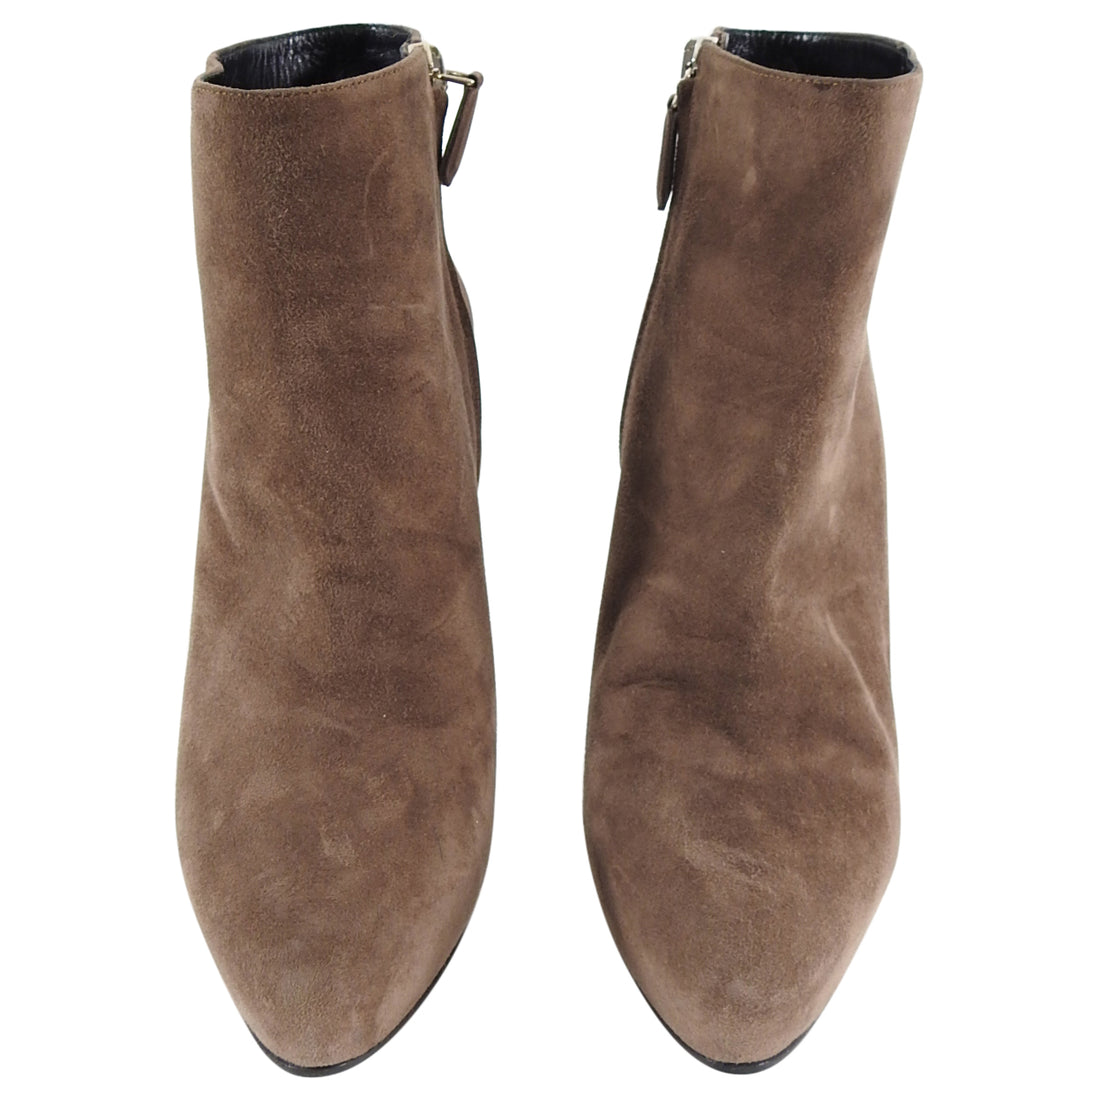 Prada Light Brown Suede Ankle Boots - 37.5